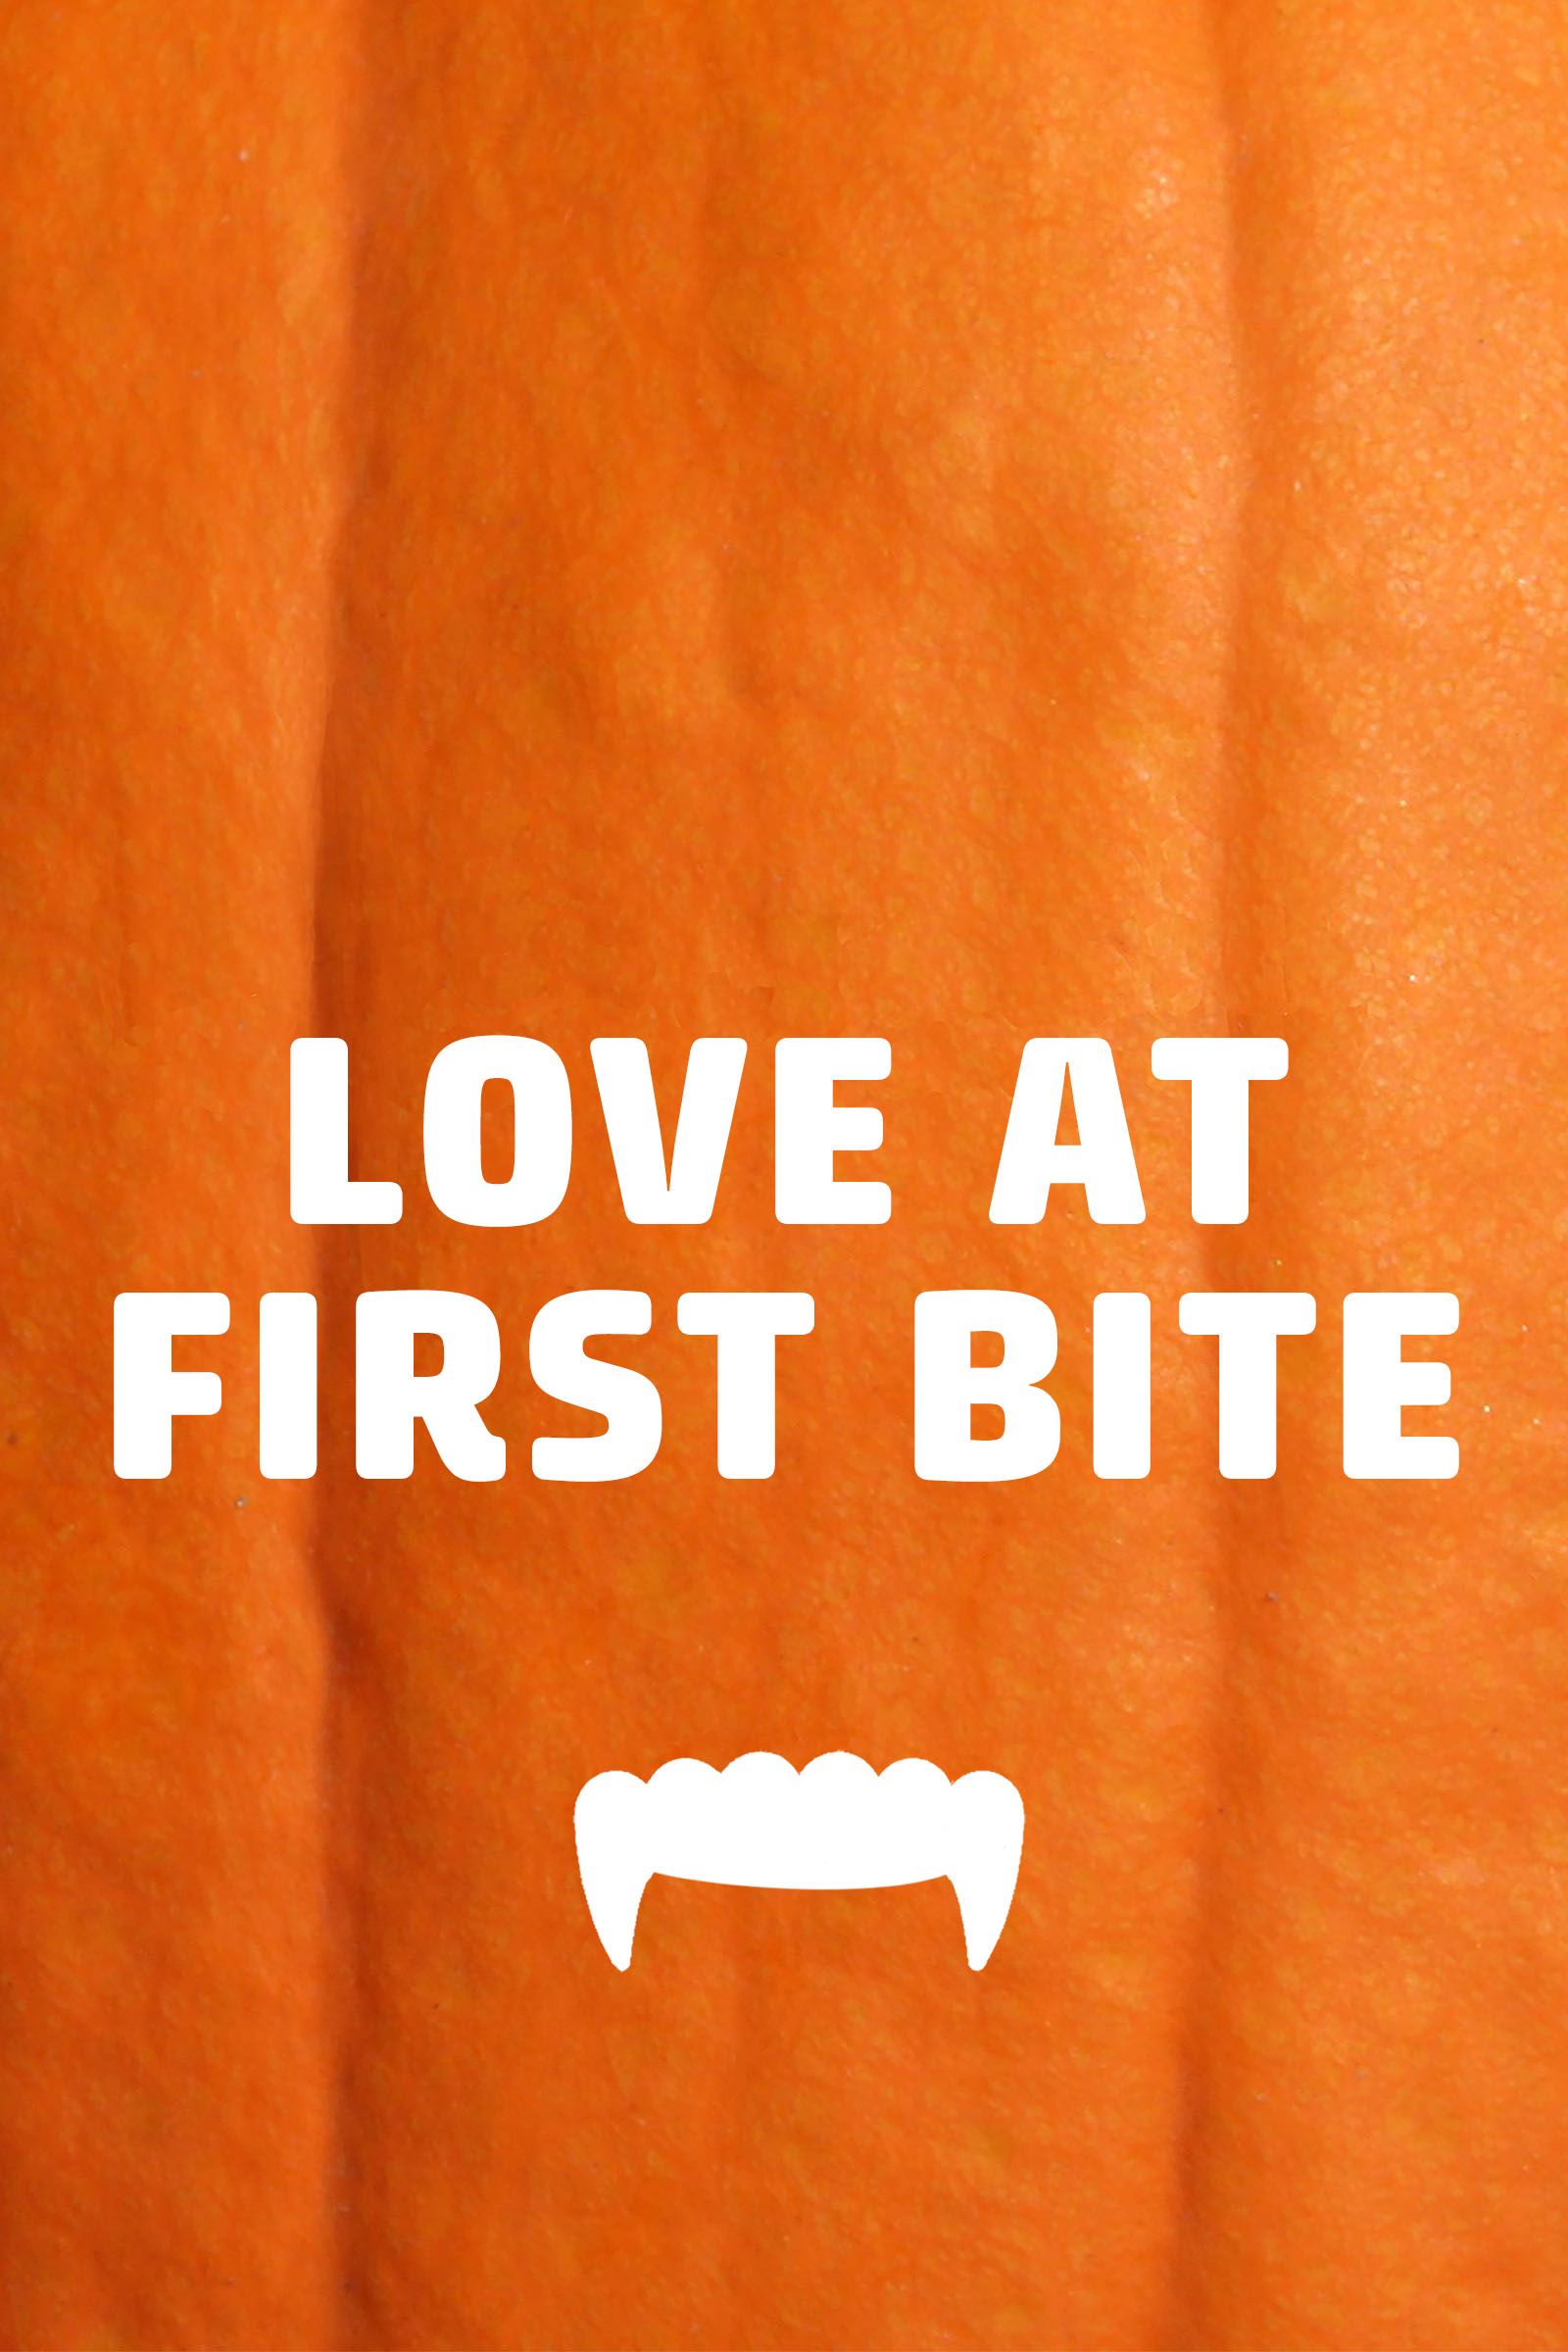 love at first bite quotes